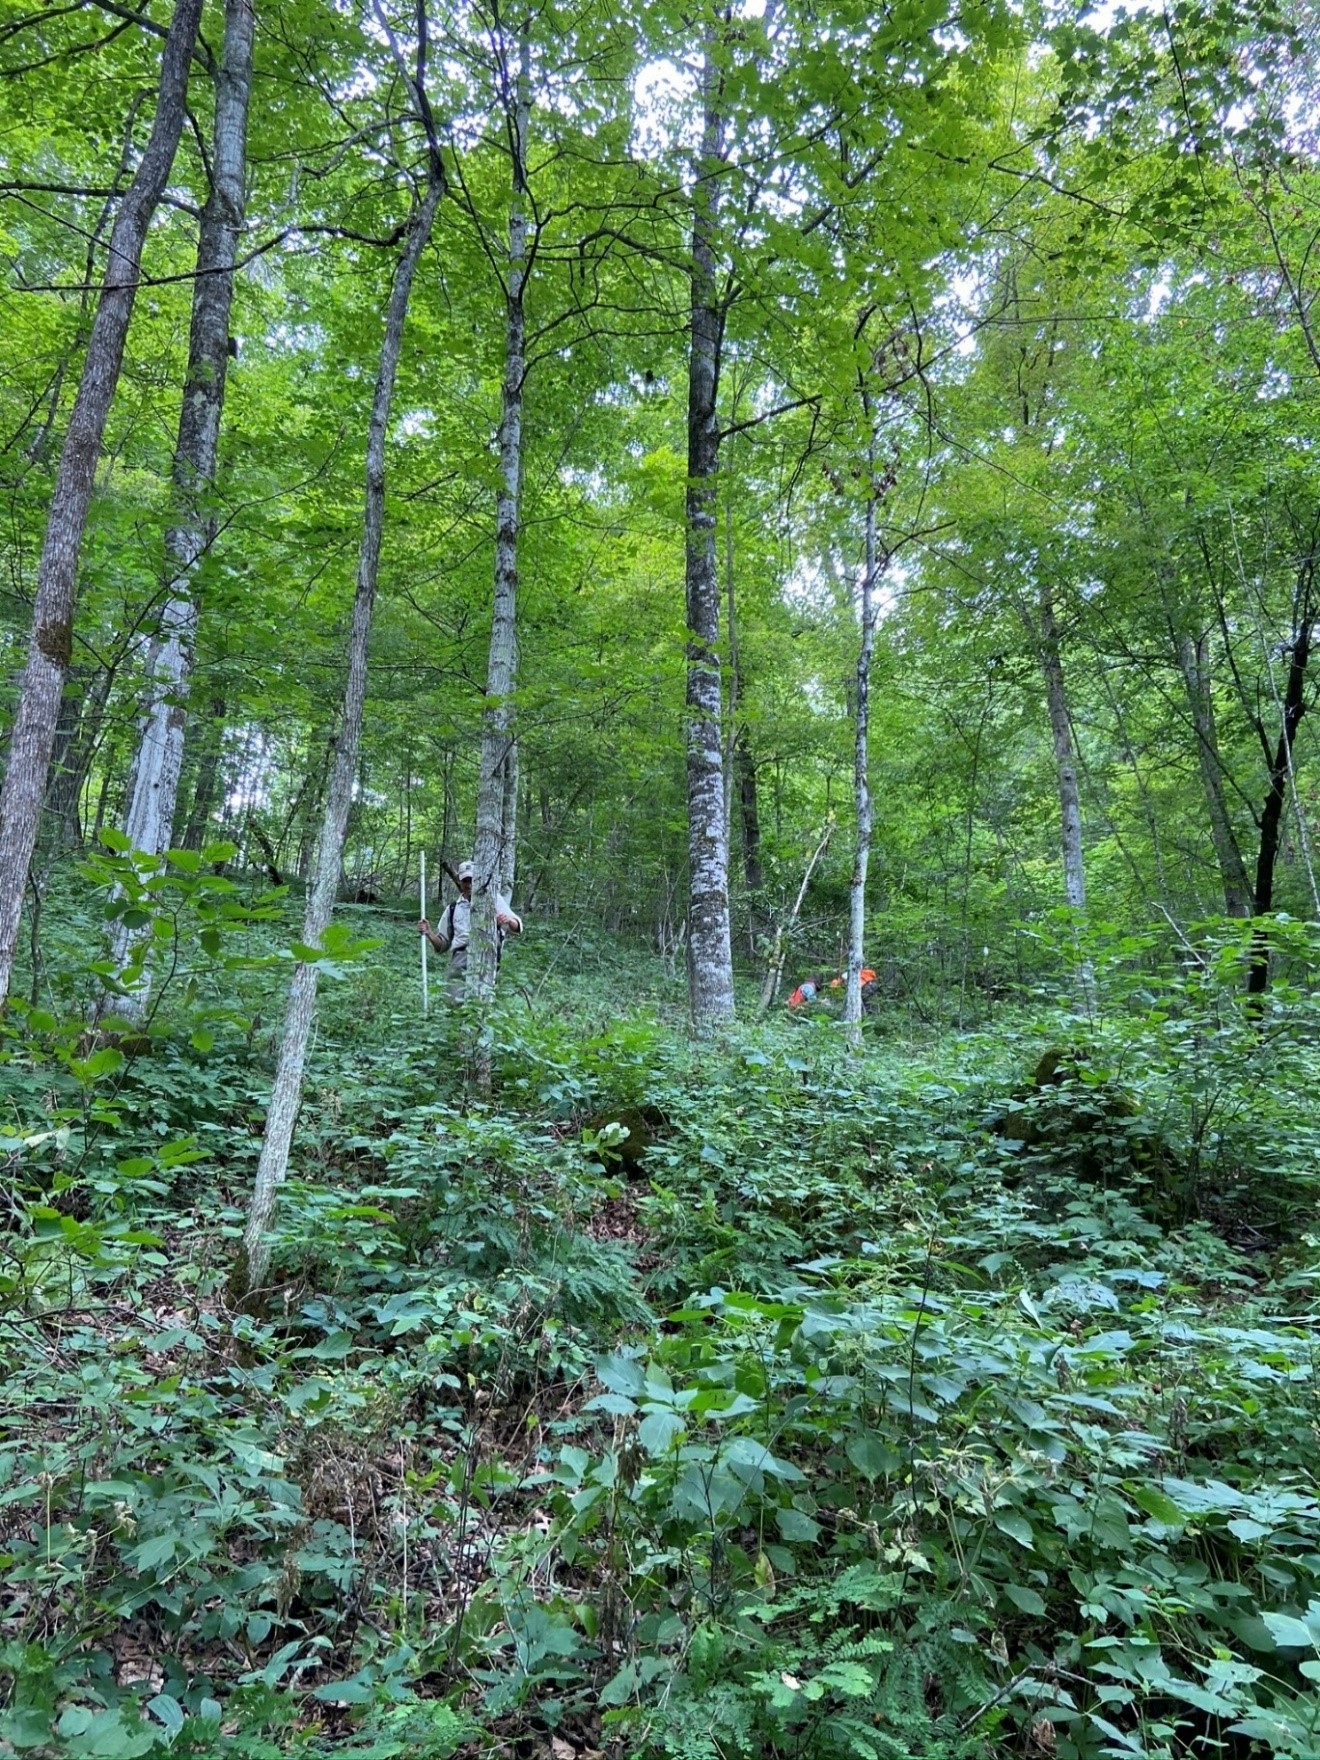 Sugar maple is the dominant mid and overstory species as of summer 2020